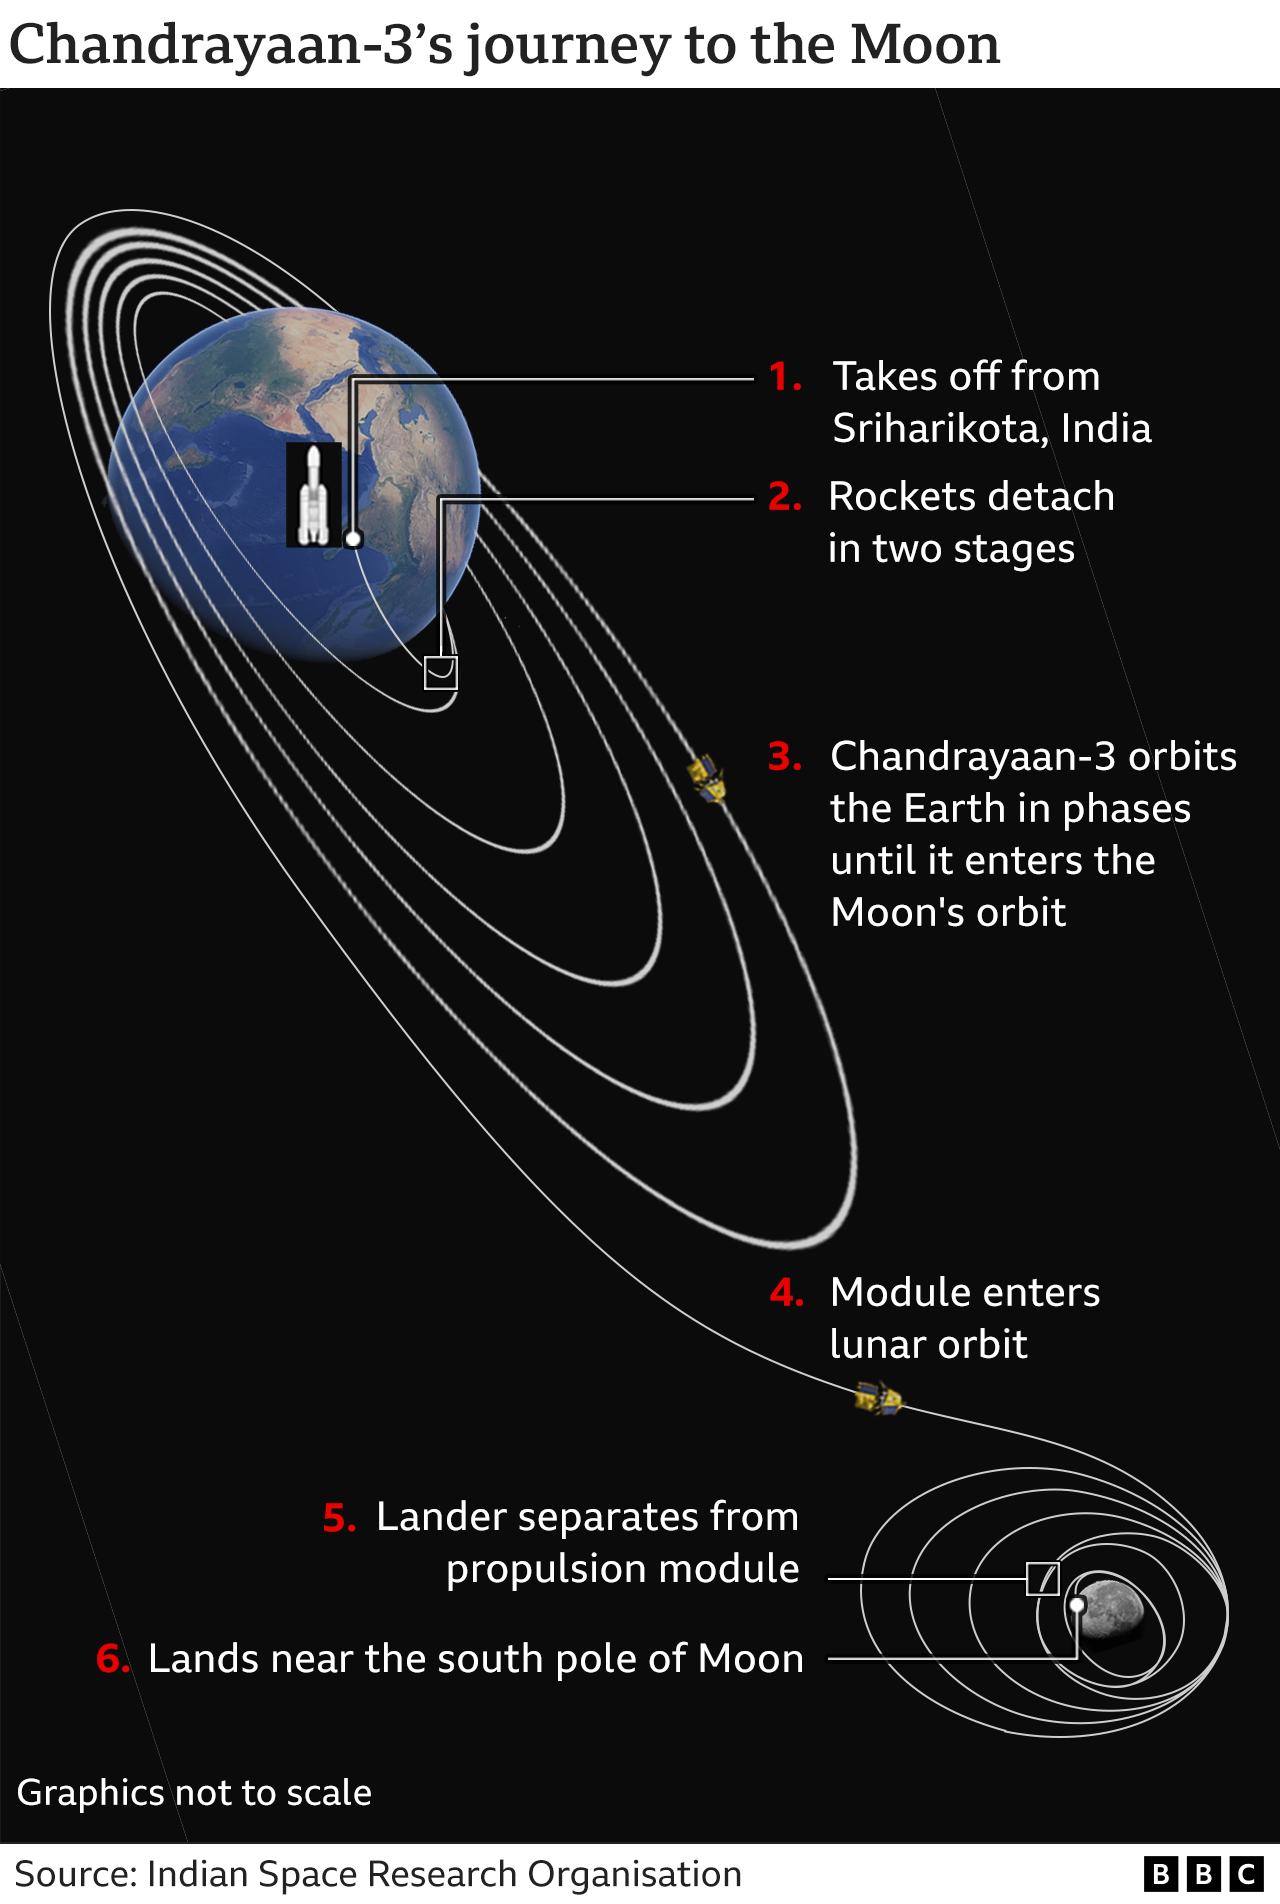 Graphic showing how the Chandrayaan-3 will get to the Moon, from take off, to orbiting the Earth in phases until it reaches the Moon's orbit, when the lander will separate from the propulsion module before landing near the Moon's south pole